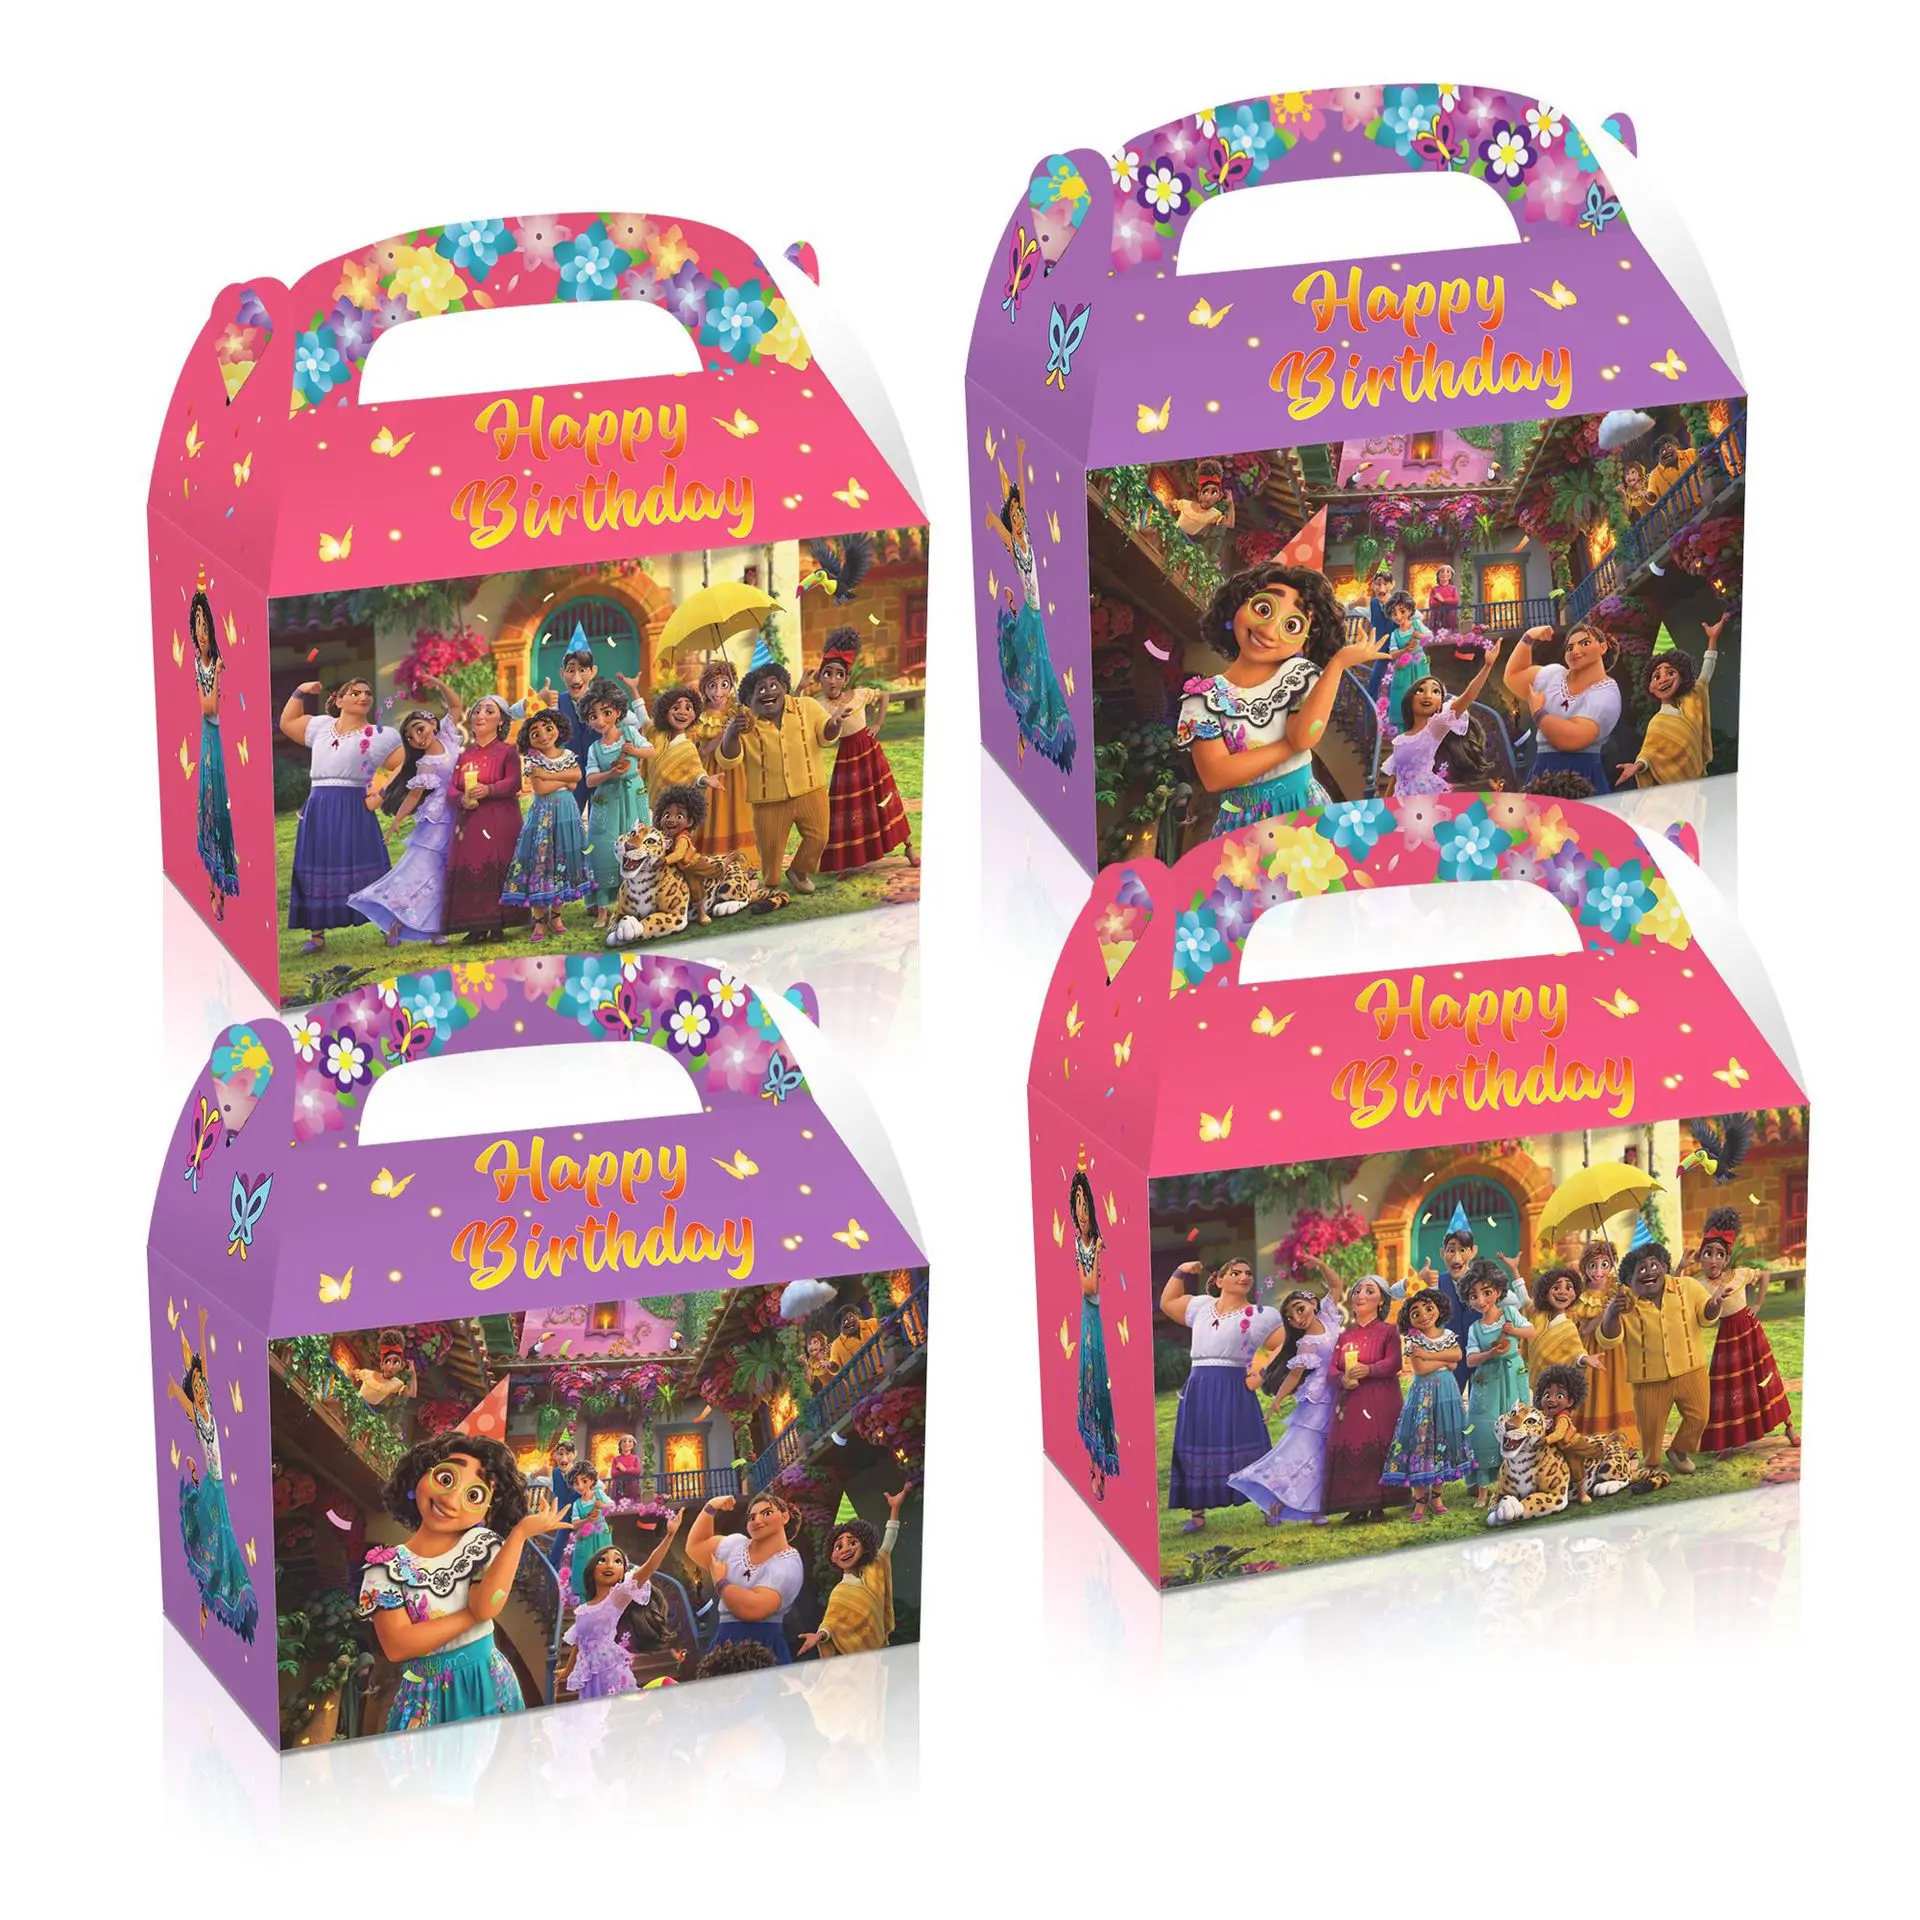 12pcs Minnie Mouse Bags for Birthday Party Candy Boxes Package Mickey Mouse Gift Box Children Birthday Party Favors Encanto Elsa